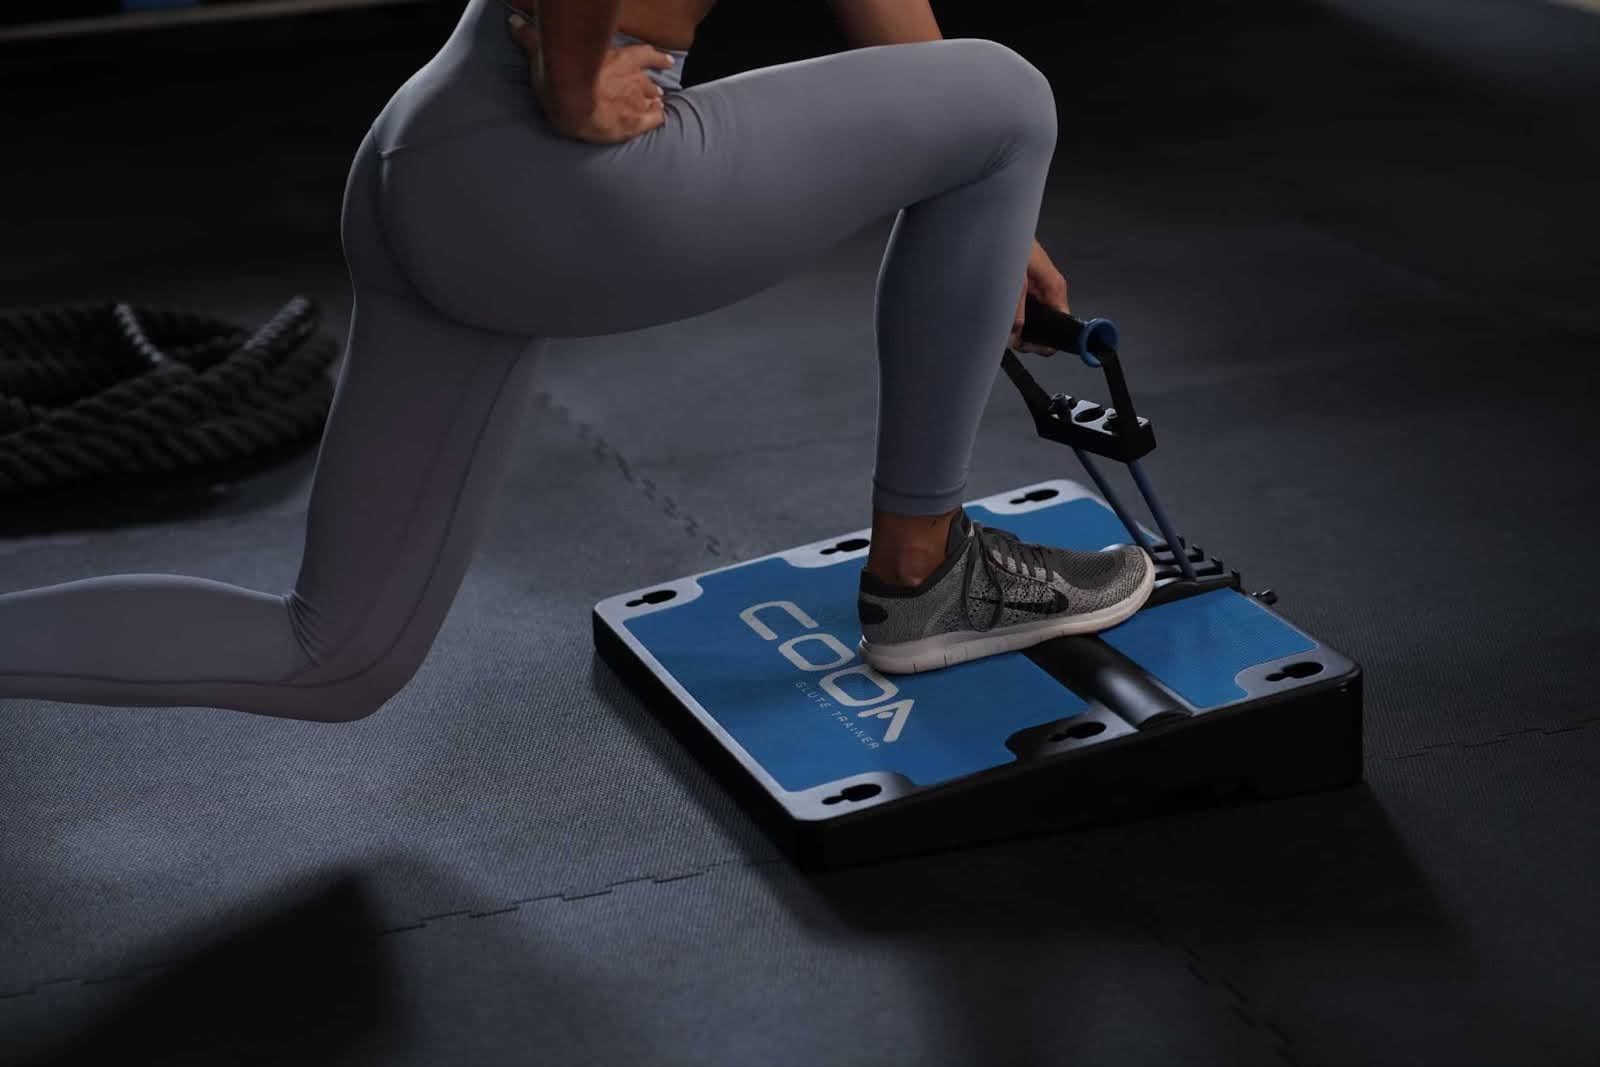 A close-up of a person’s legs in gray leggings using the COBA Board Plus™. The person is performing an exercise with one knee on the board and the other leg extended back.